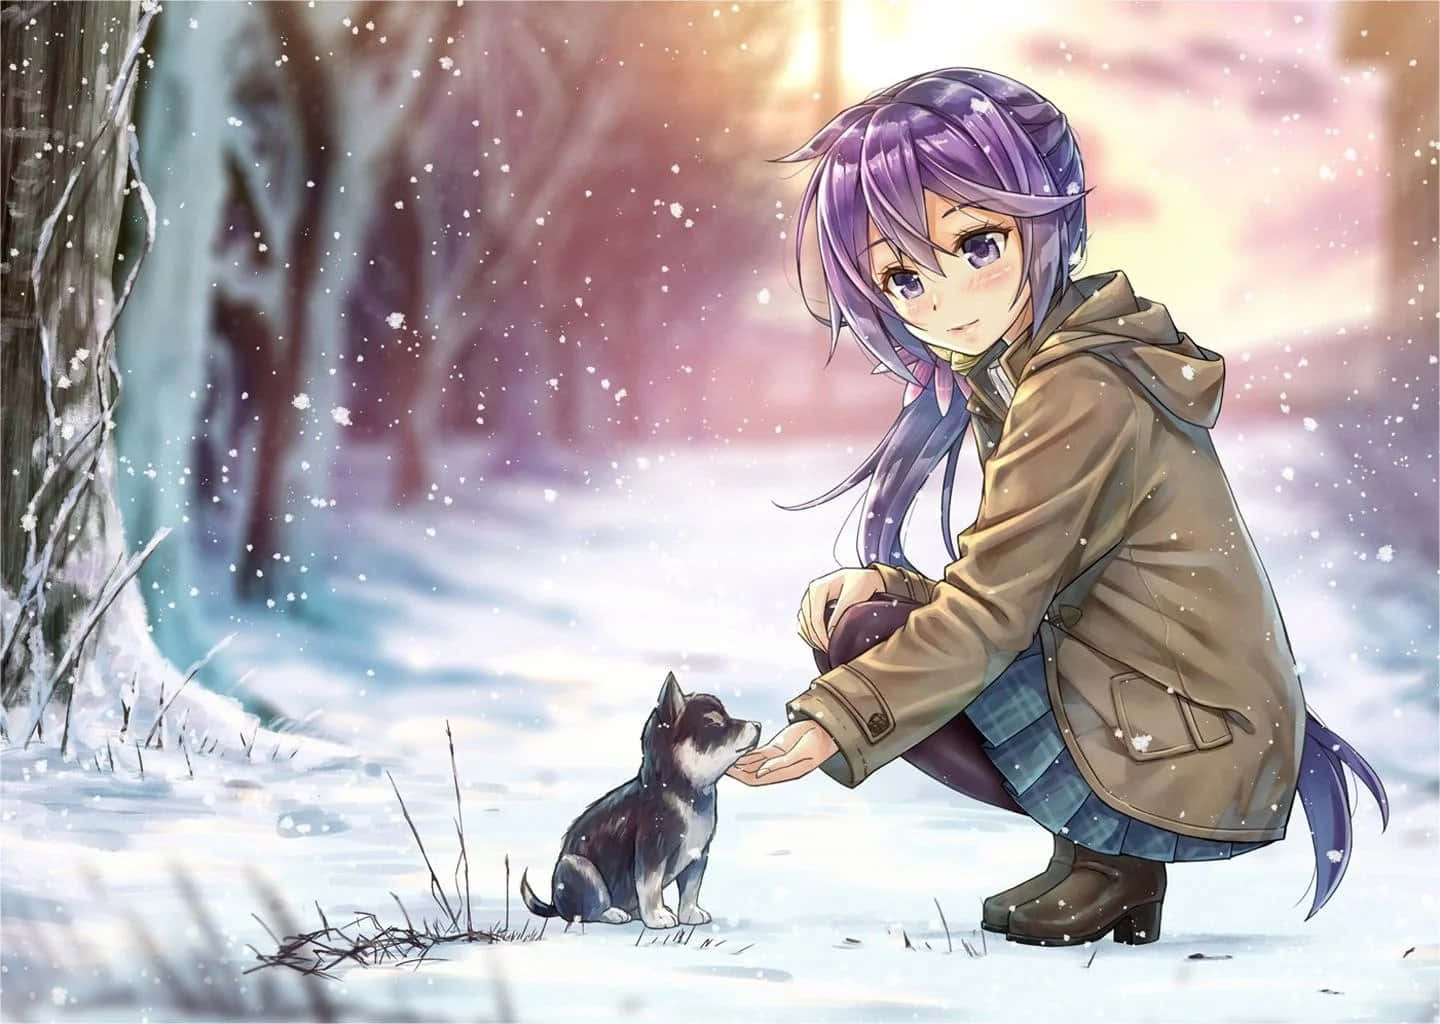 An anime-inspired depiction of an inquisitive canine.